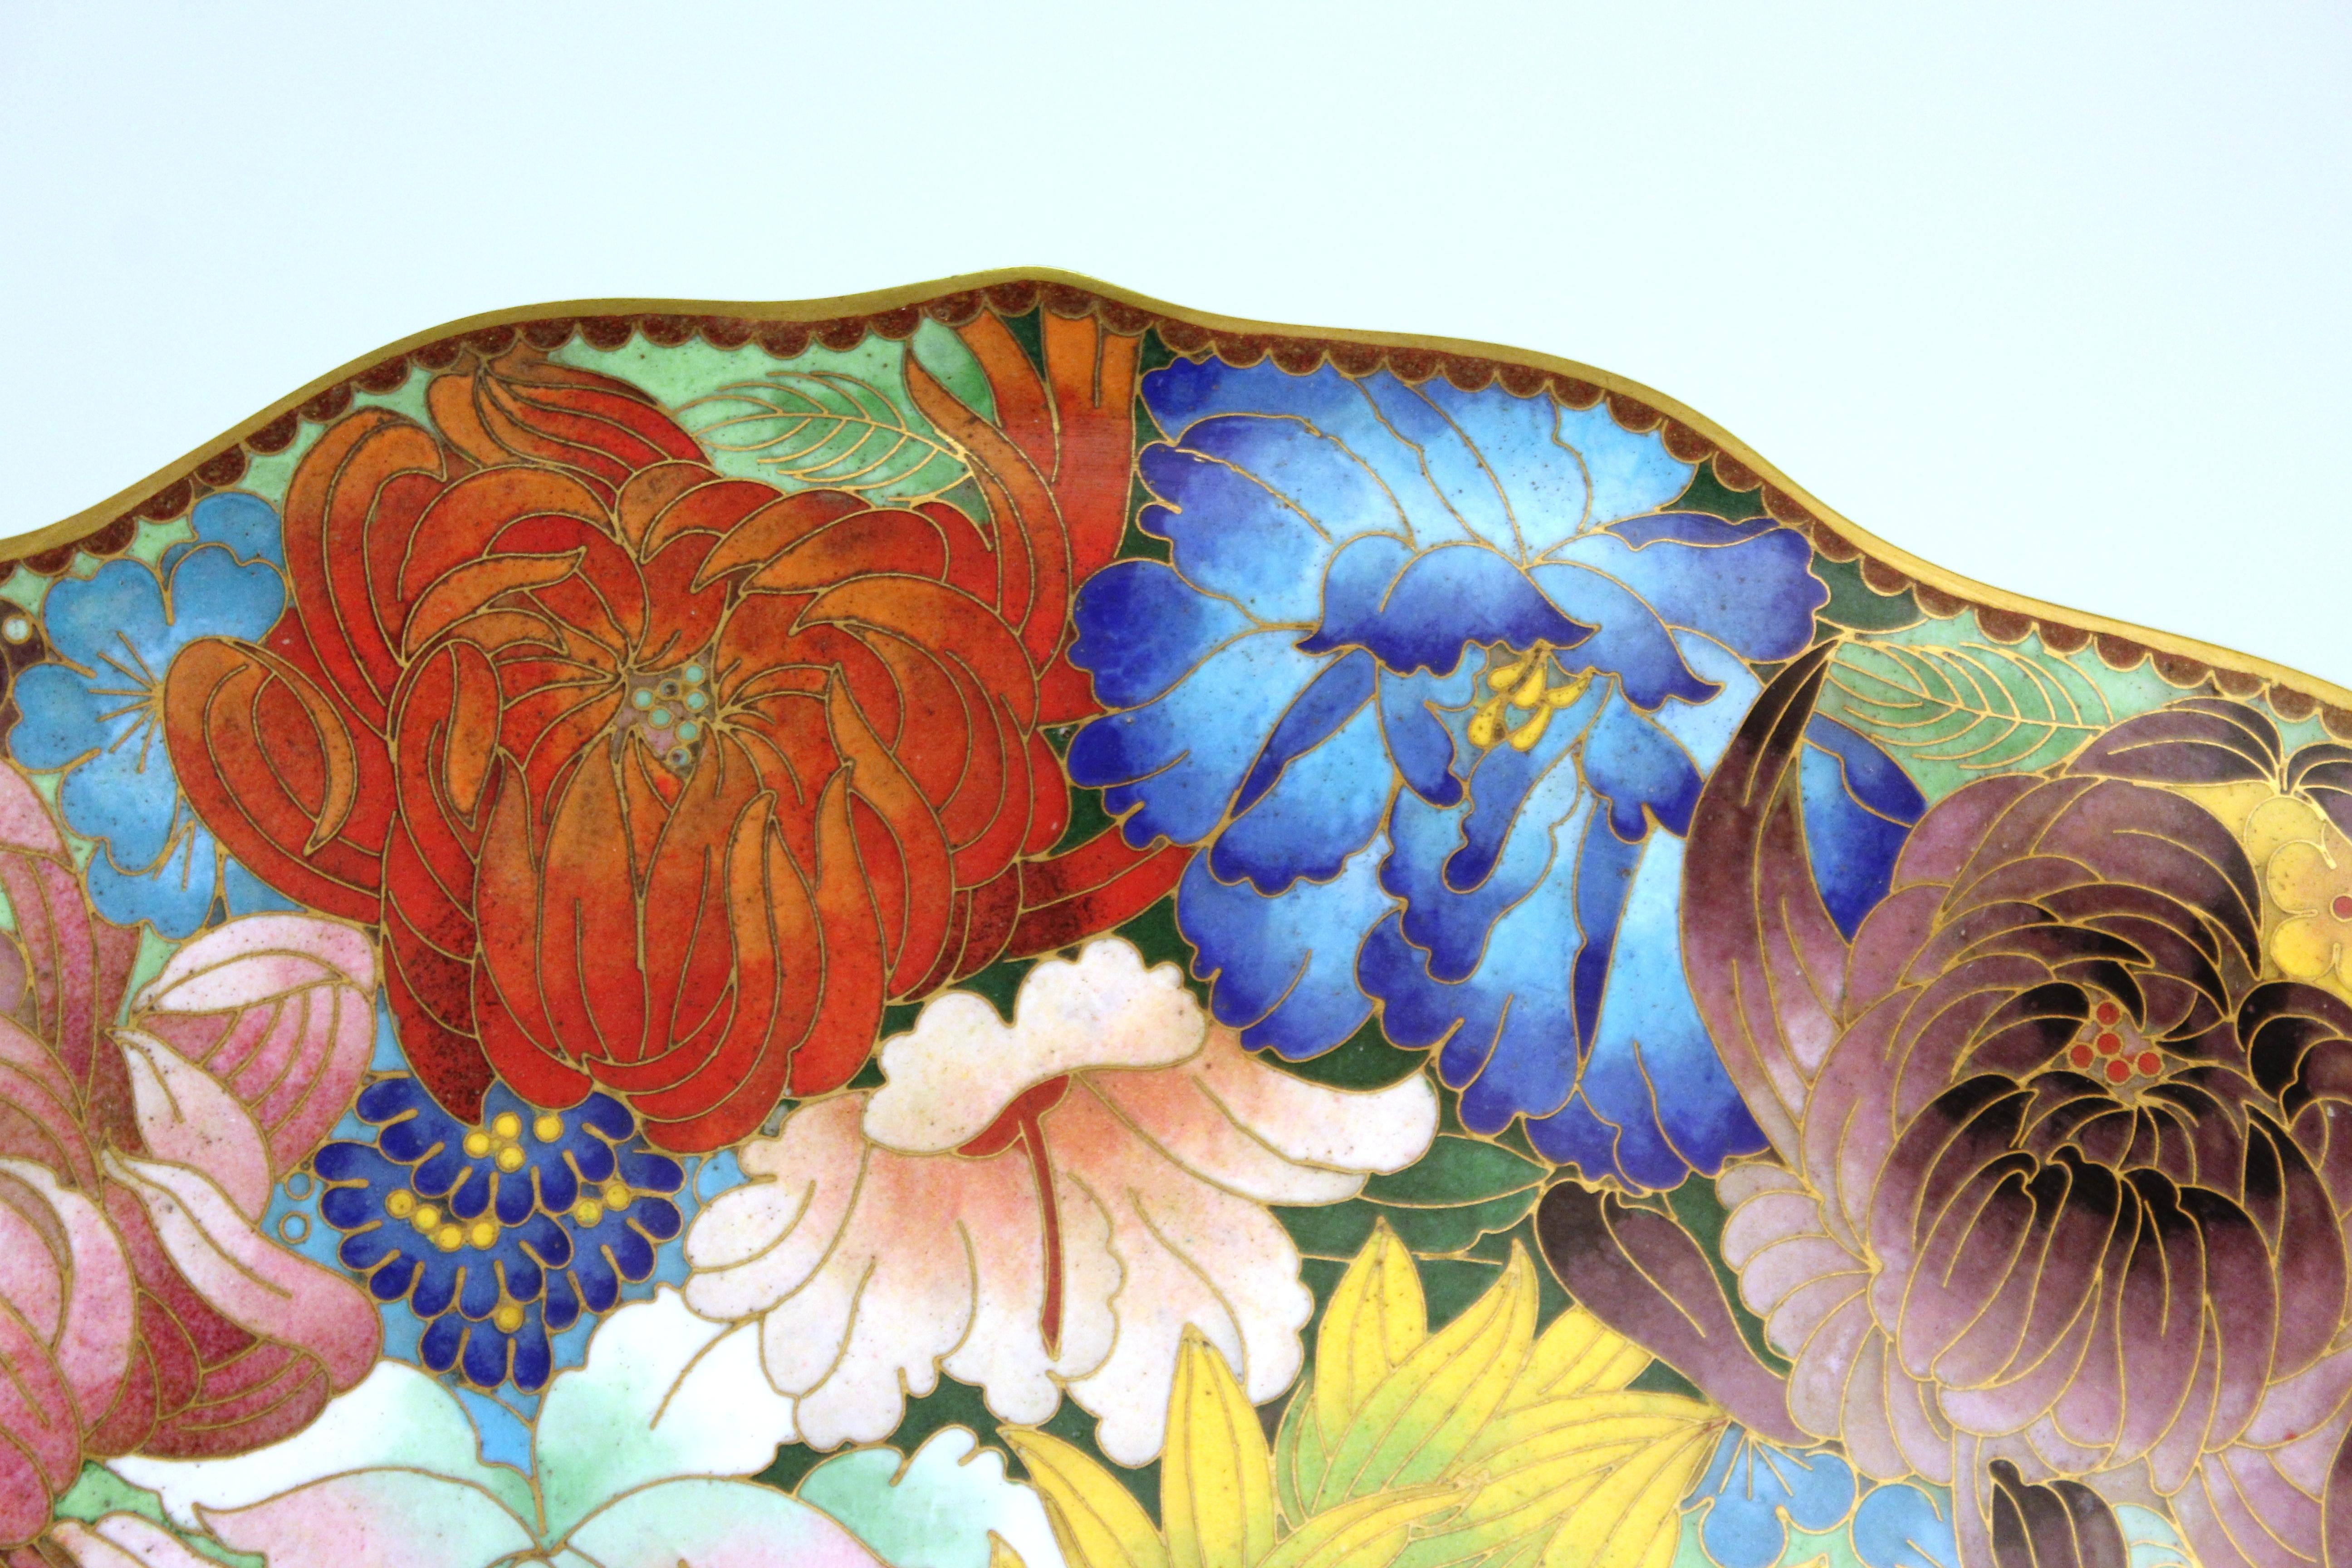 Chinese Enamel Cloisonné Charger with Multicolored Floral Motif For Sale 7